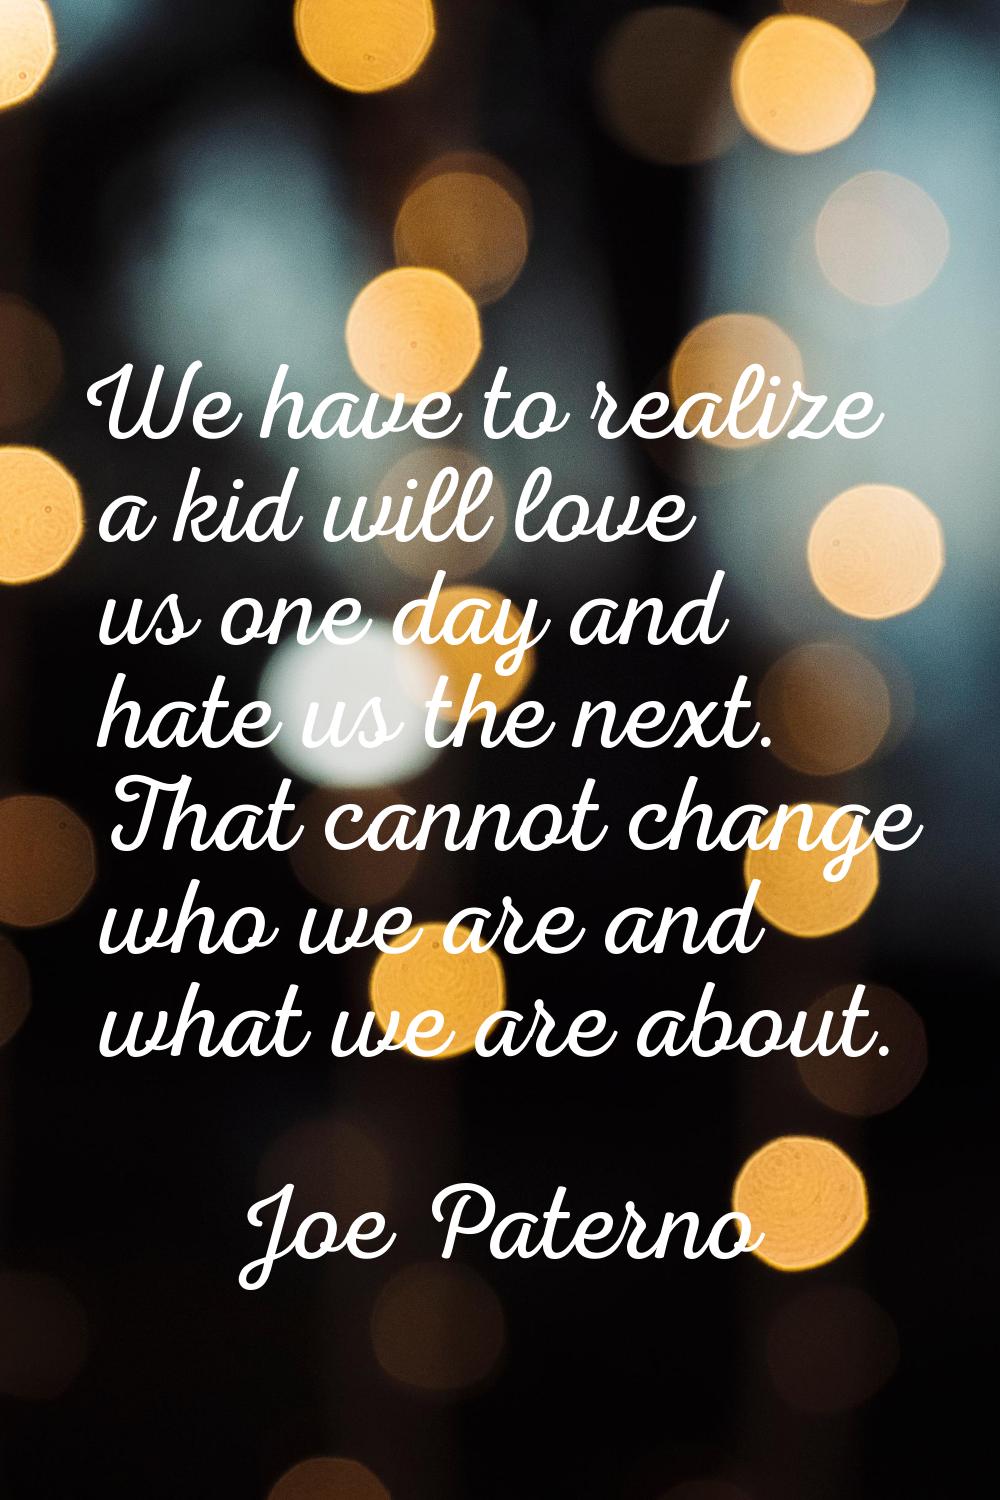 We have to realize a kid will love us one day and hate us the next. That cannot change who we are a